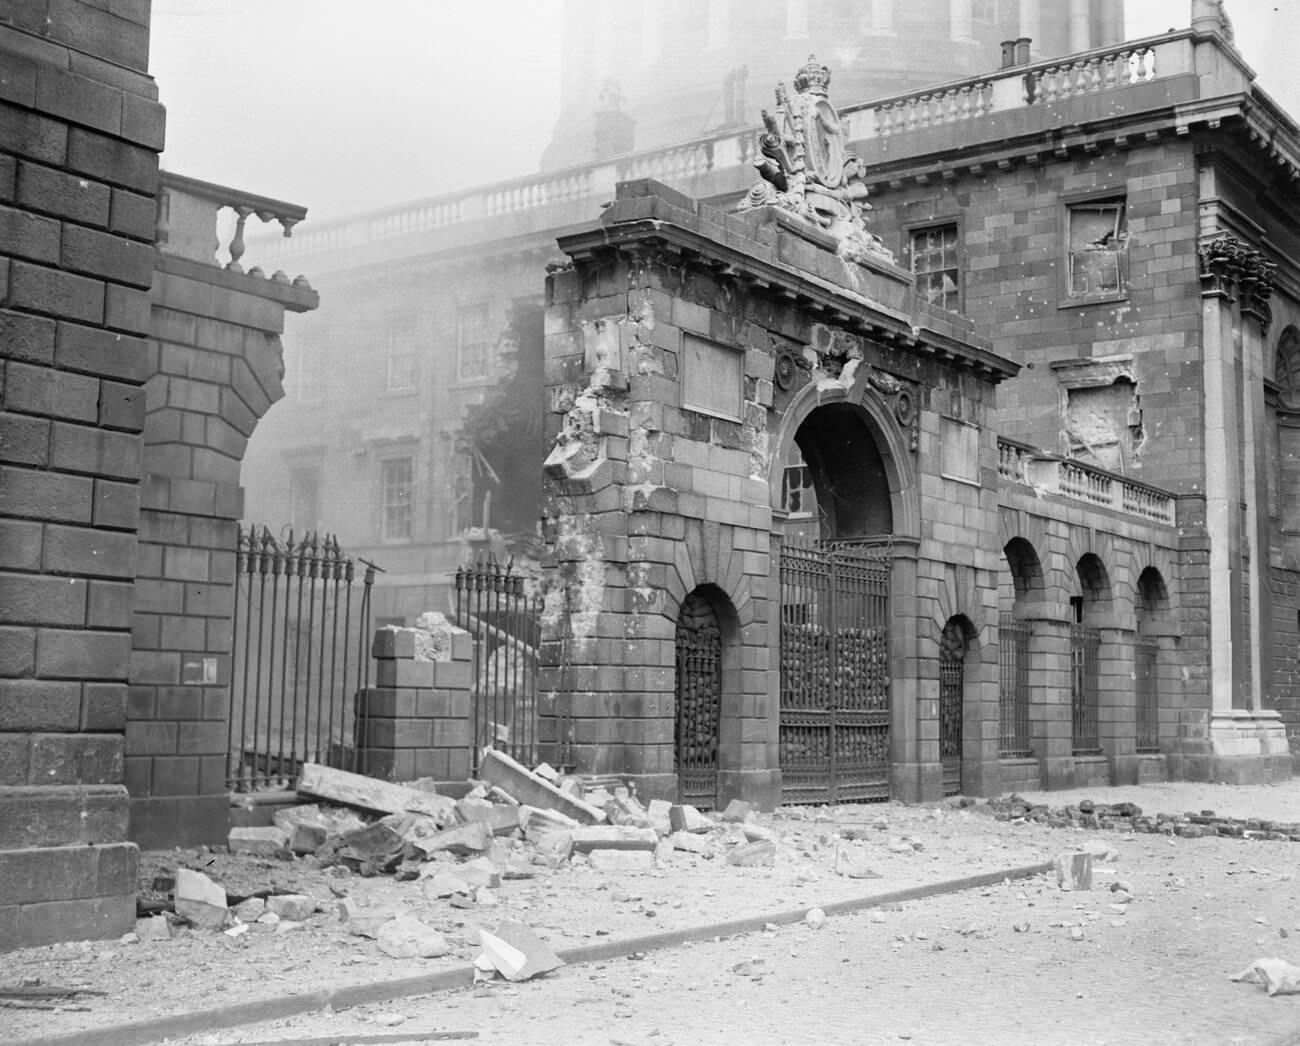 The gap torn in the front of the Four Courts showing the damage near the main entrance, 1922.